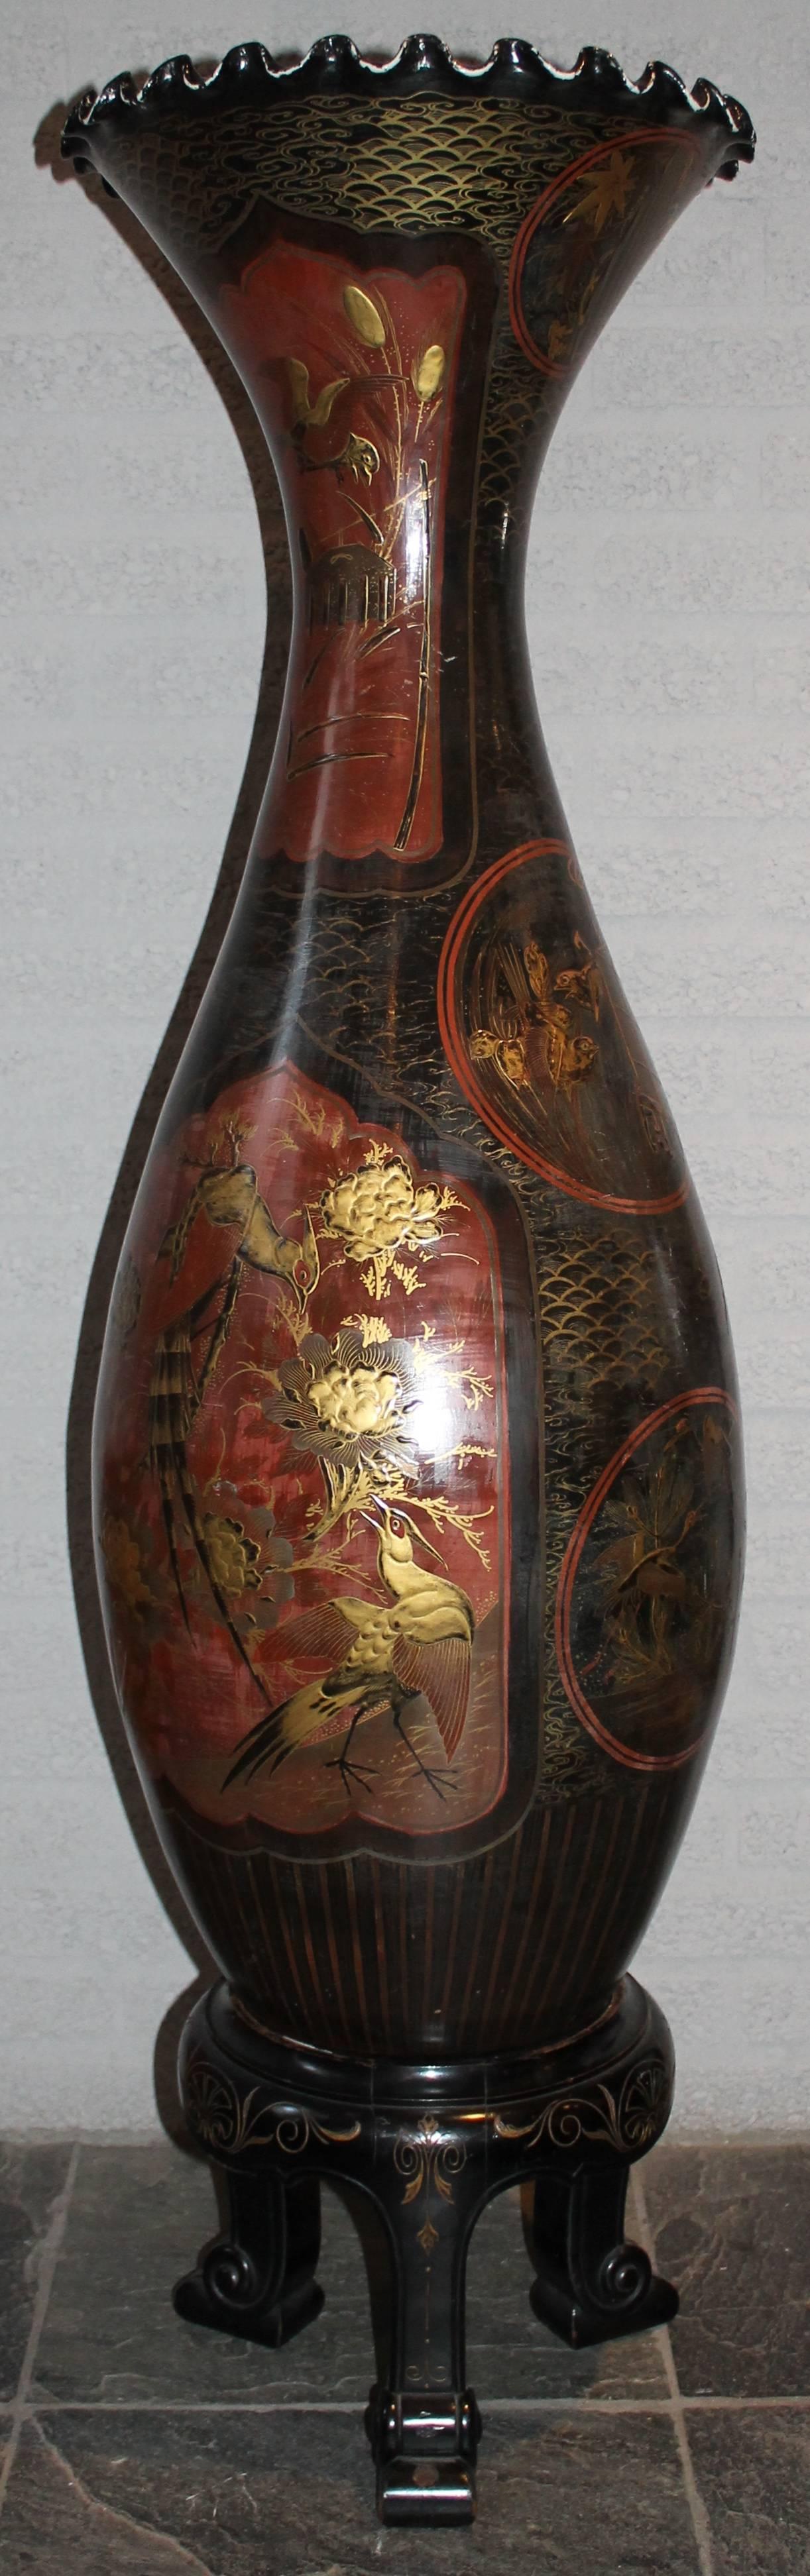 Pair of porcelain vases, Japan, circa 1900 (Meiji: 1868-1912), in black, red and gold.
  